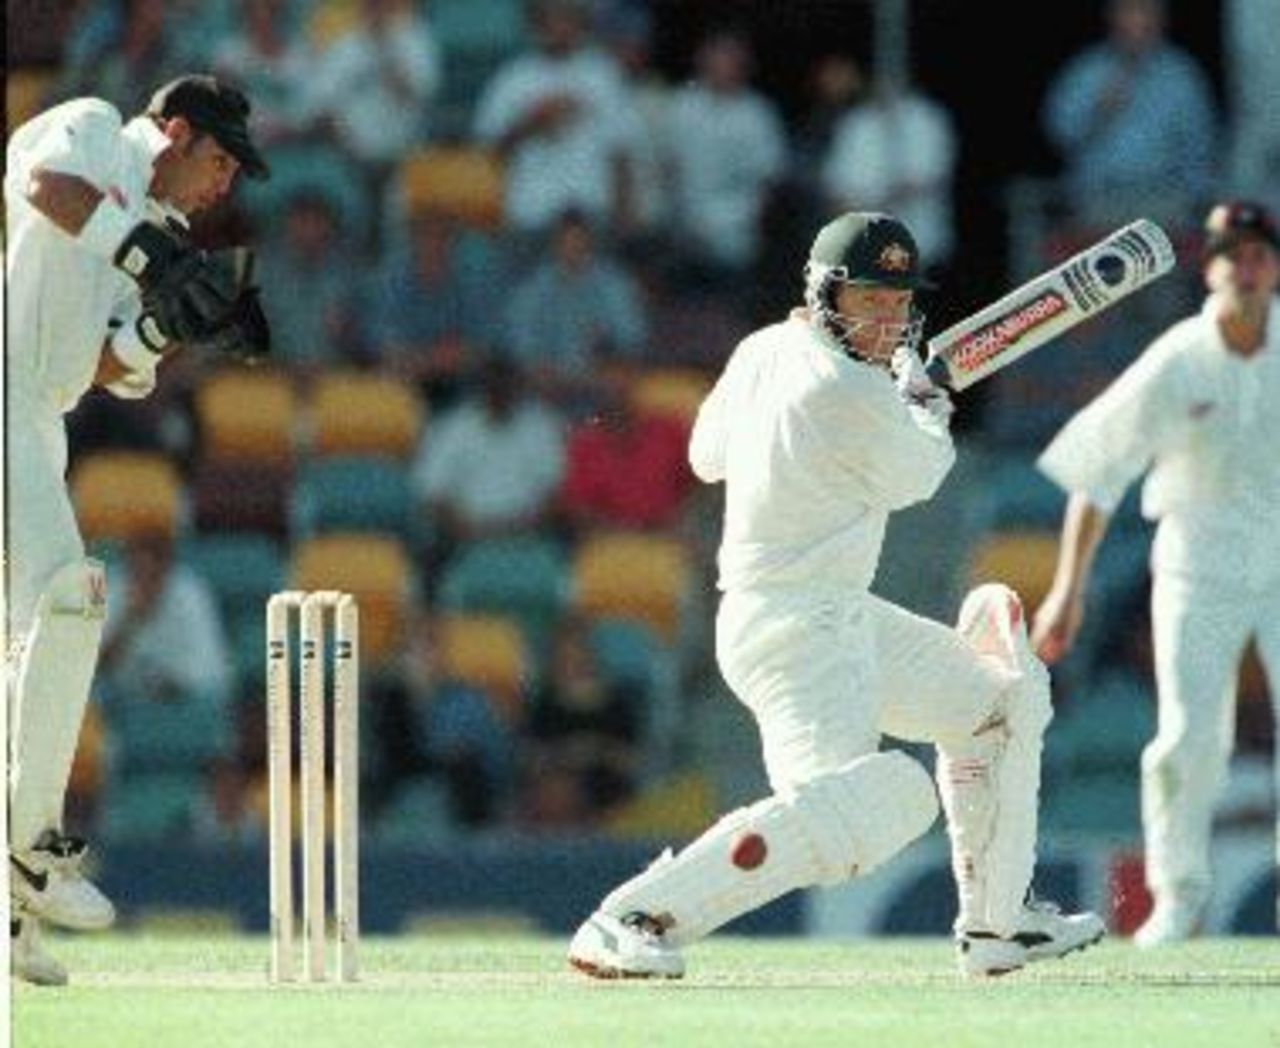 Ian Healy cuts on his way to a 50 during the first day of the Australia v New Zealand Test at the Gabba, 7 11 Nov 1997